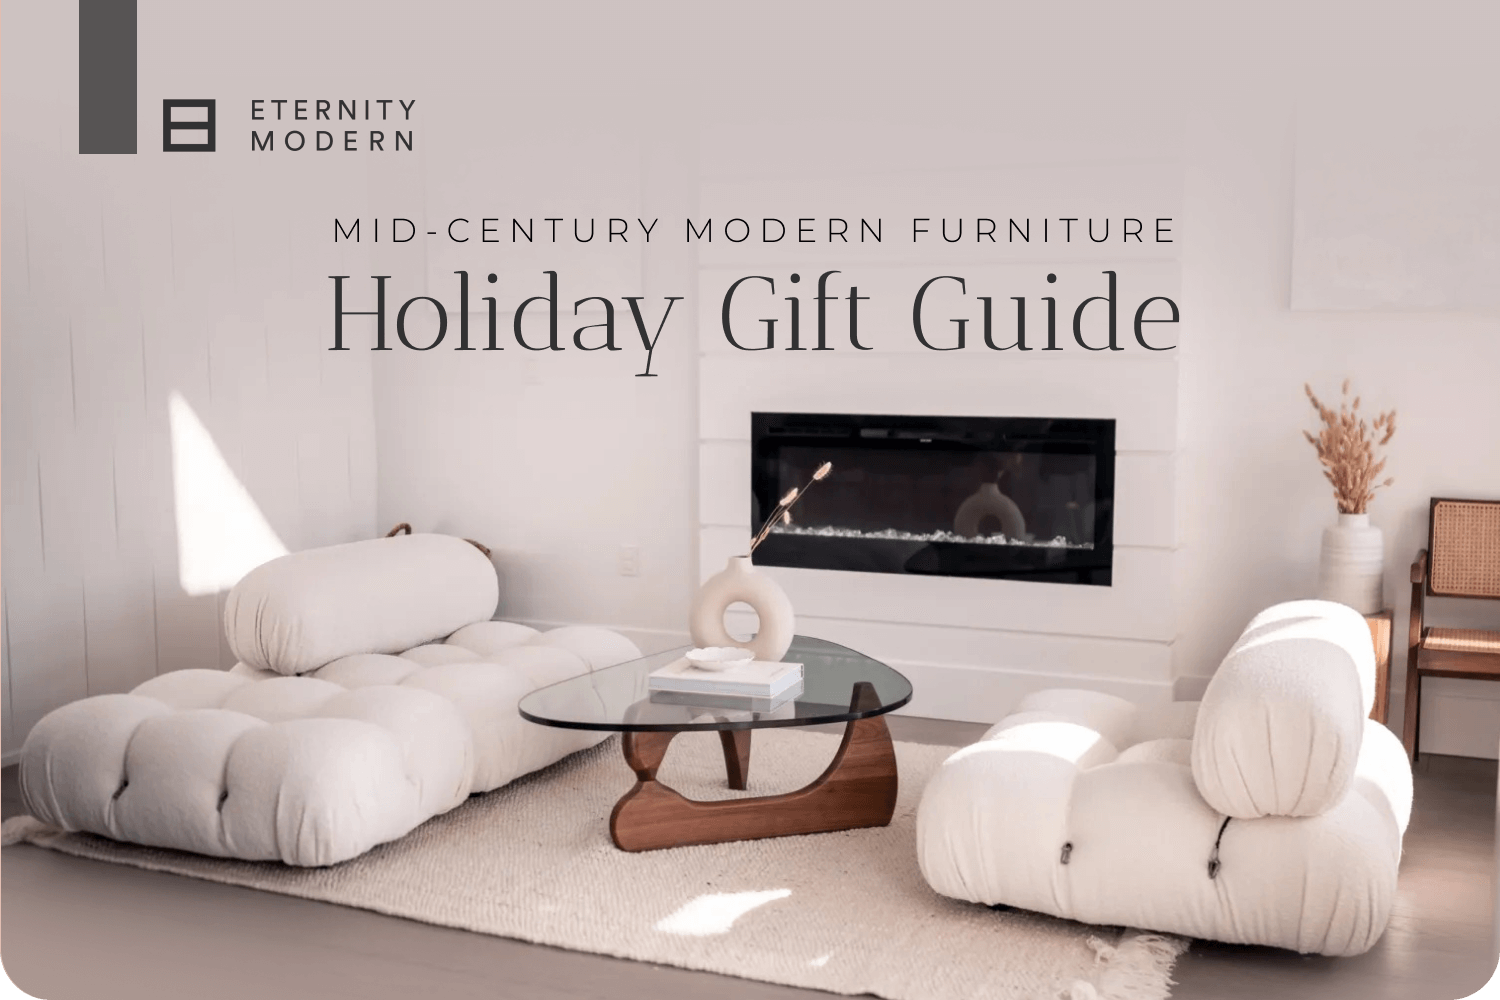 Why you should give the gift of furniture this holiday season